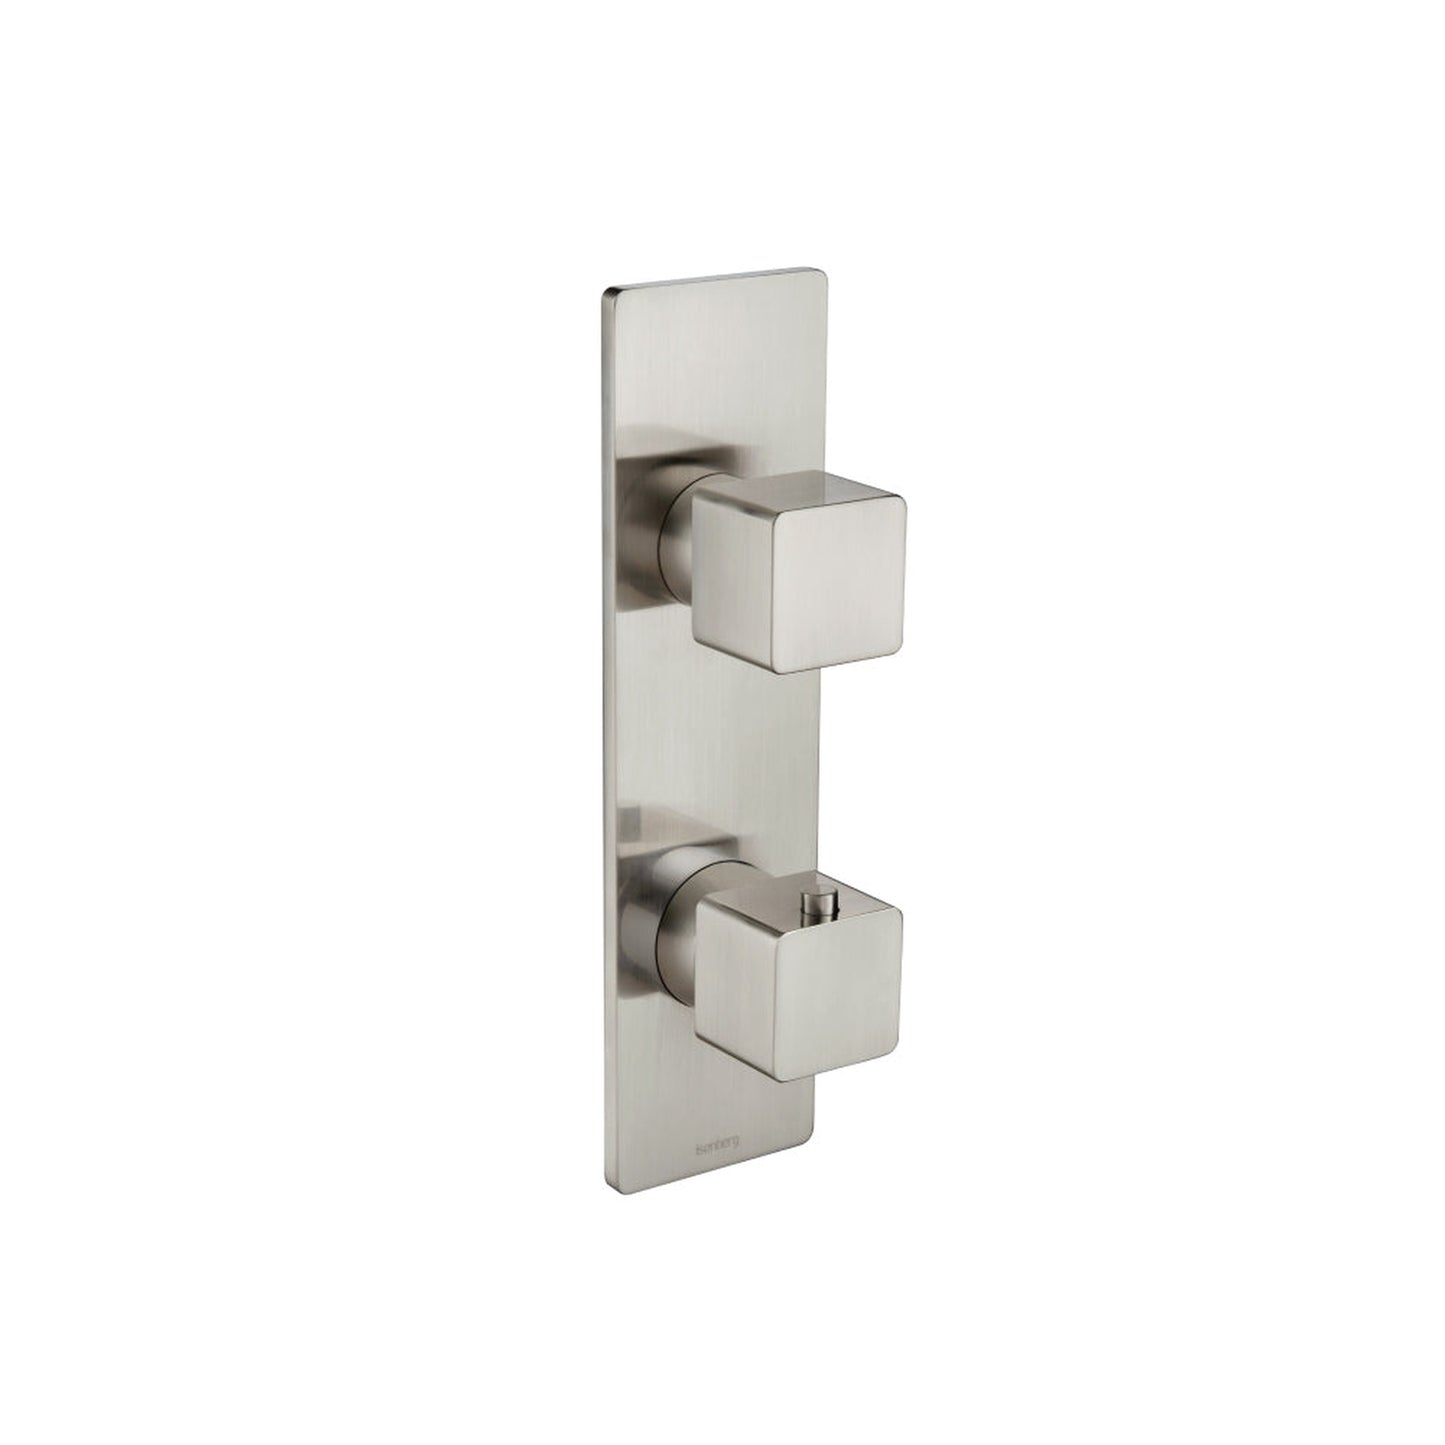 Isenberg Serie 196 3/4" Single Output Horizontal Thermostatic Shower Valve and Trim in Brushed Nickel (196.2720BN)